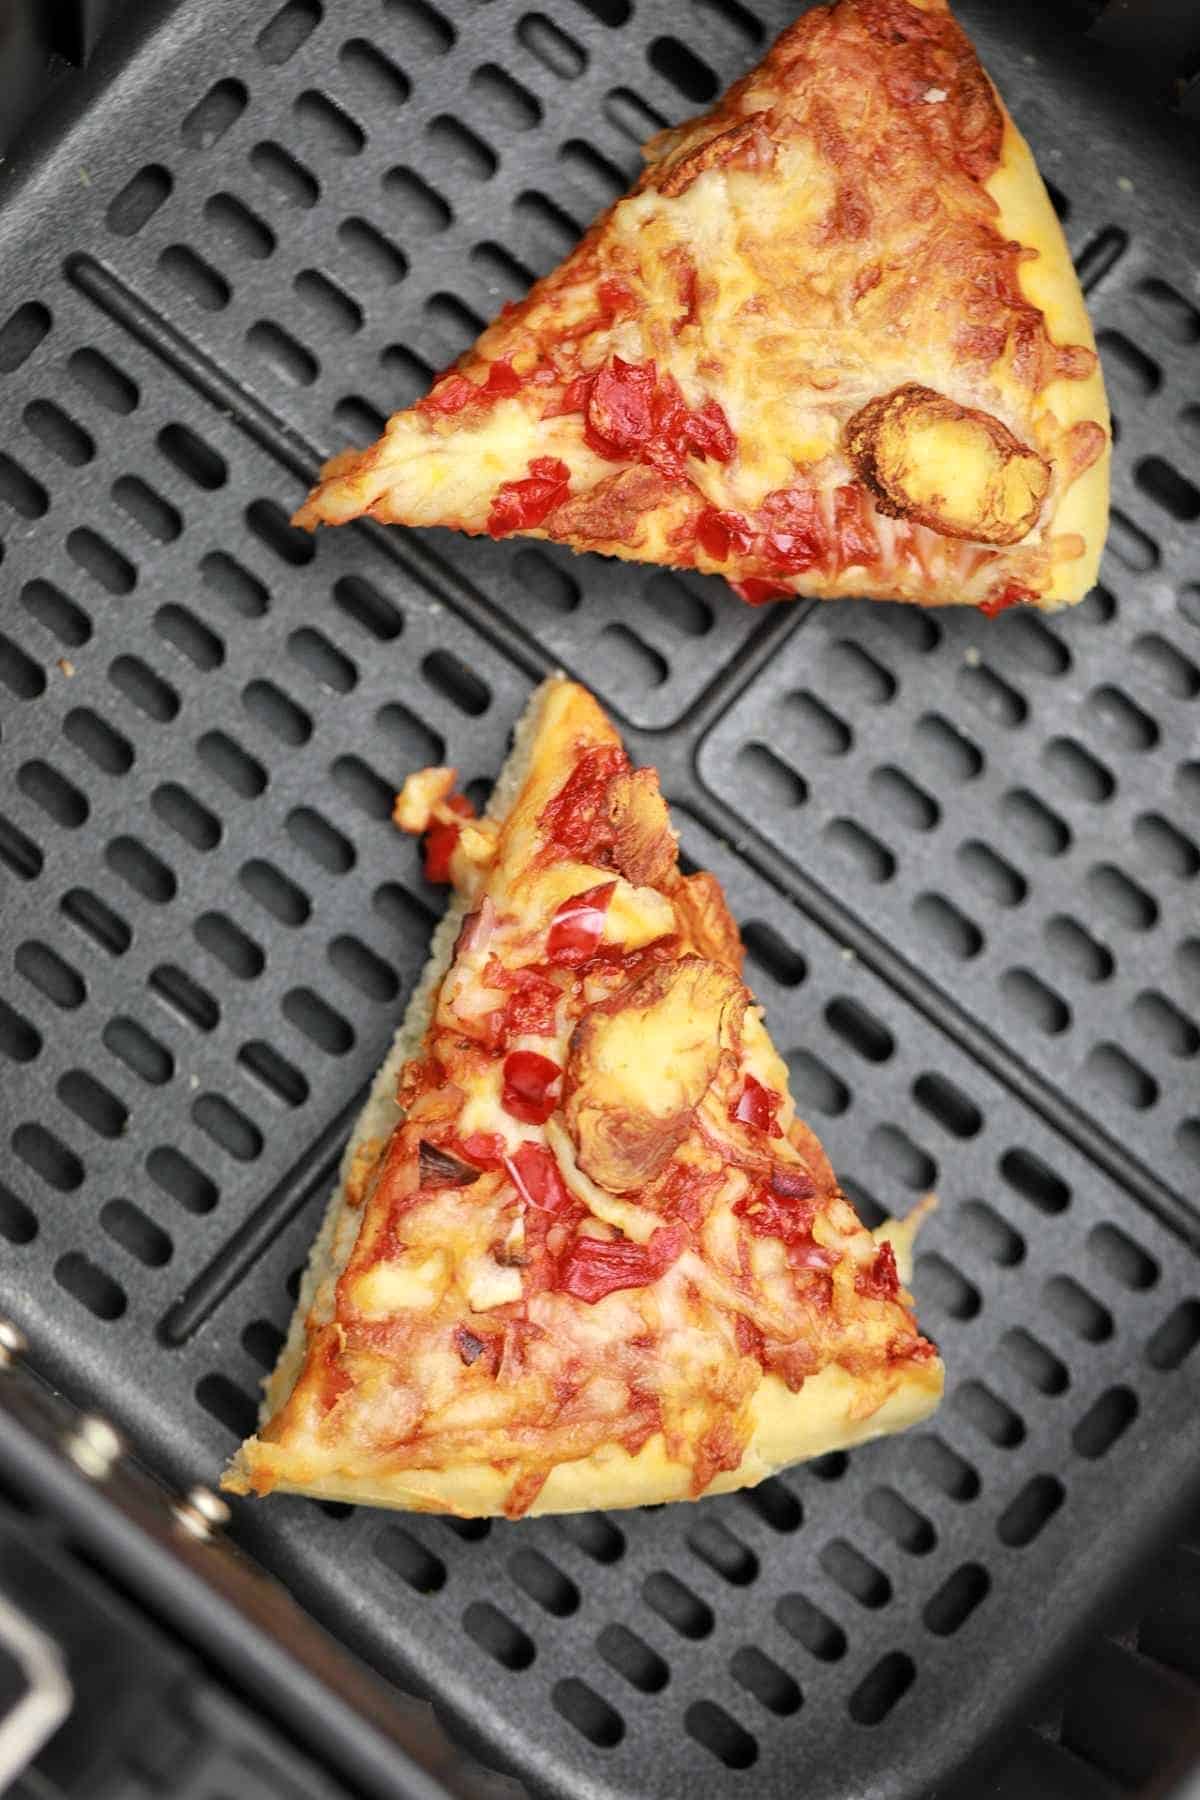 2 slices reheating pizza in air fryer.